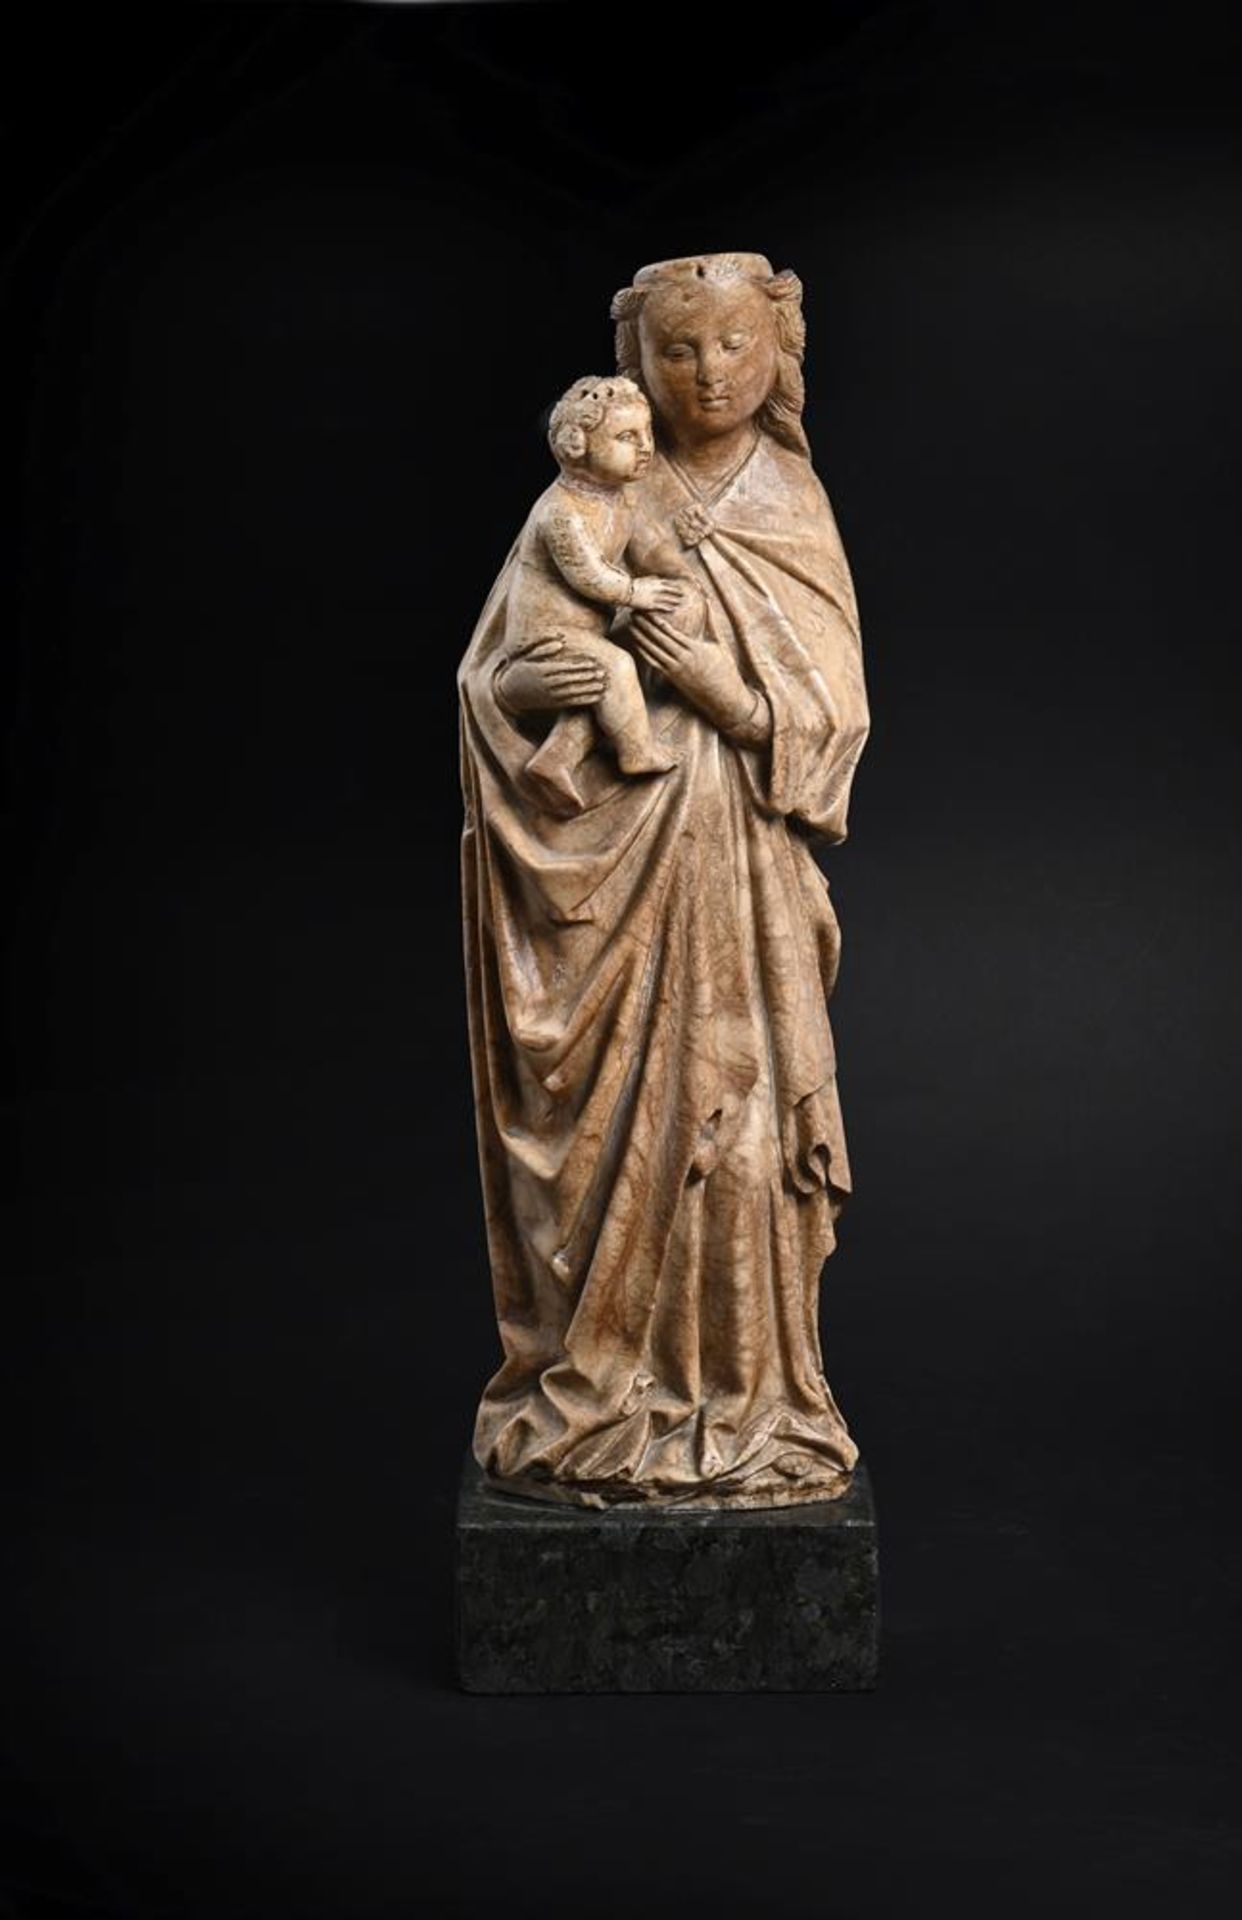 A GOTHIC CARVED ALABASTER FIGURE OF THE VIRGIN AND CHILD, 14TH CENTURY - Image 3 of 9